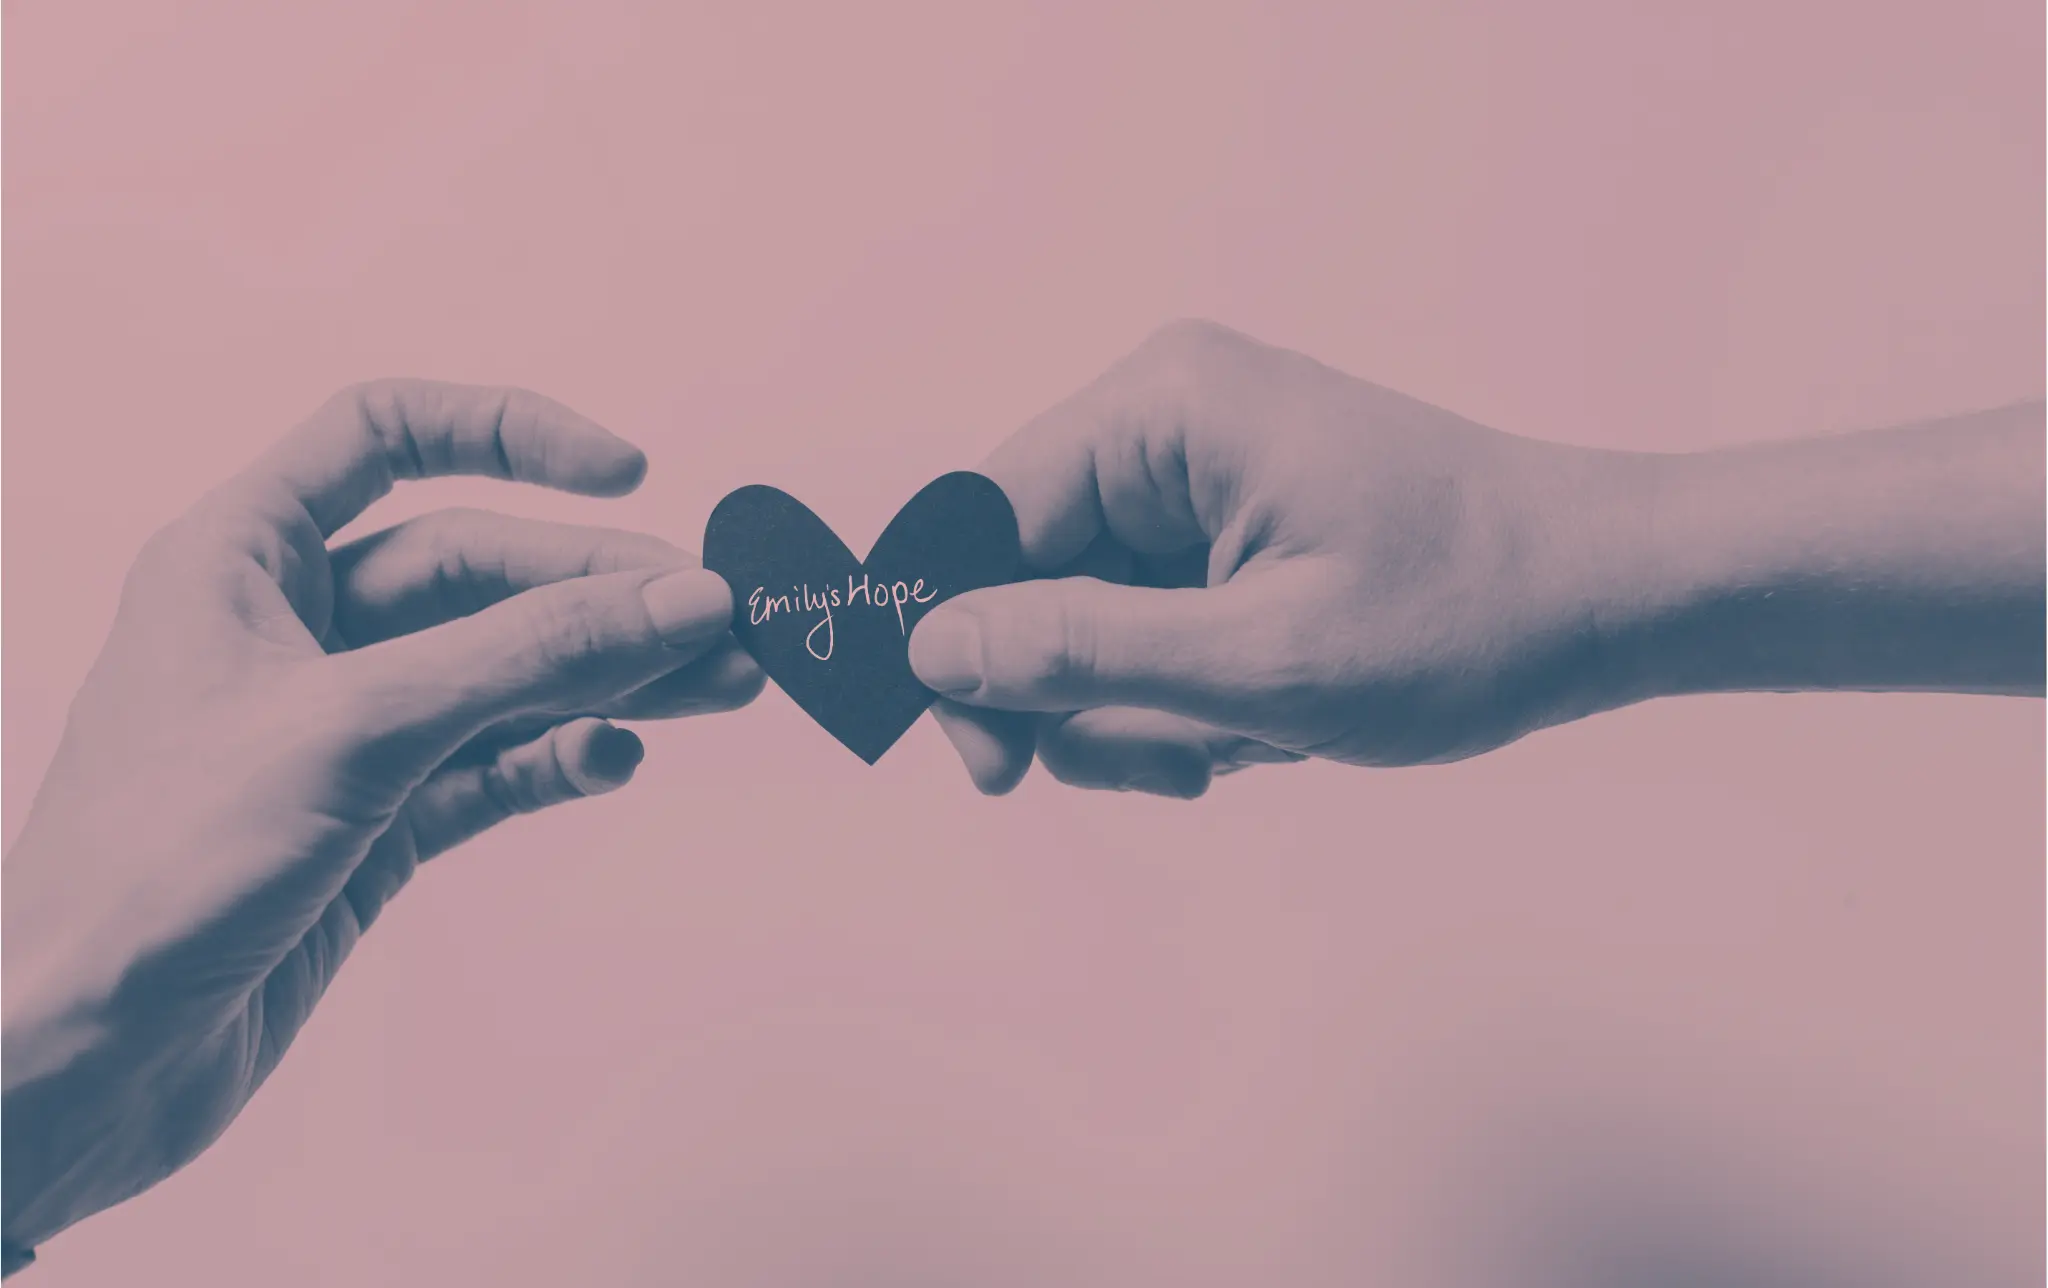 Two hands holding a paper heart with the Emily's Hope logo